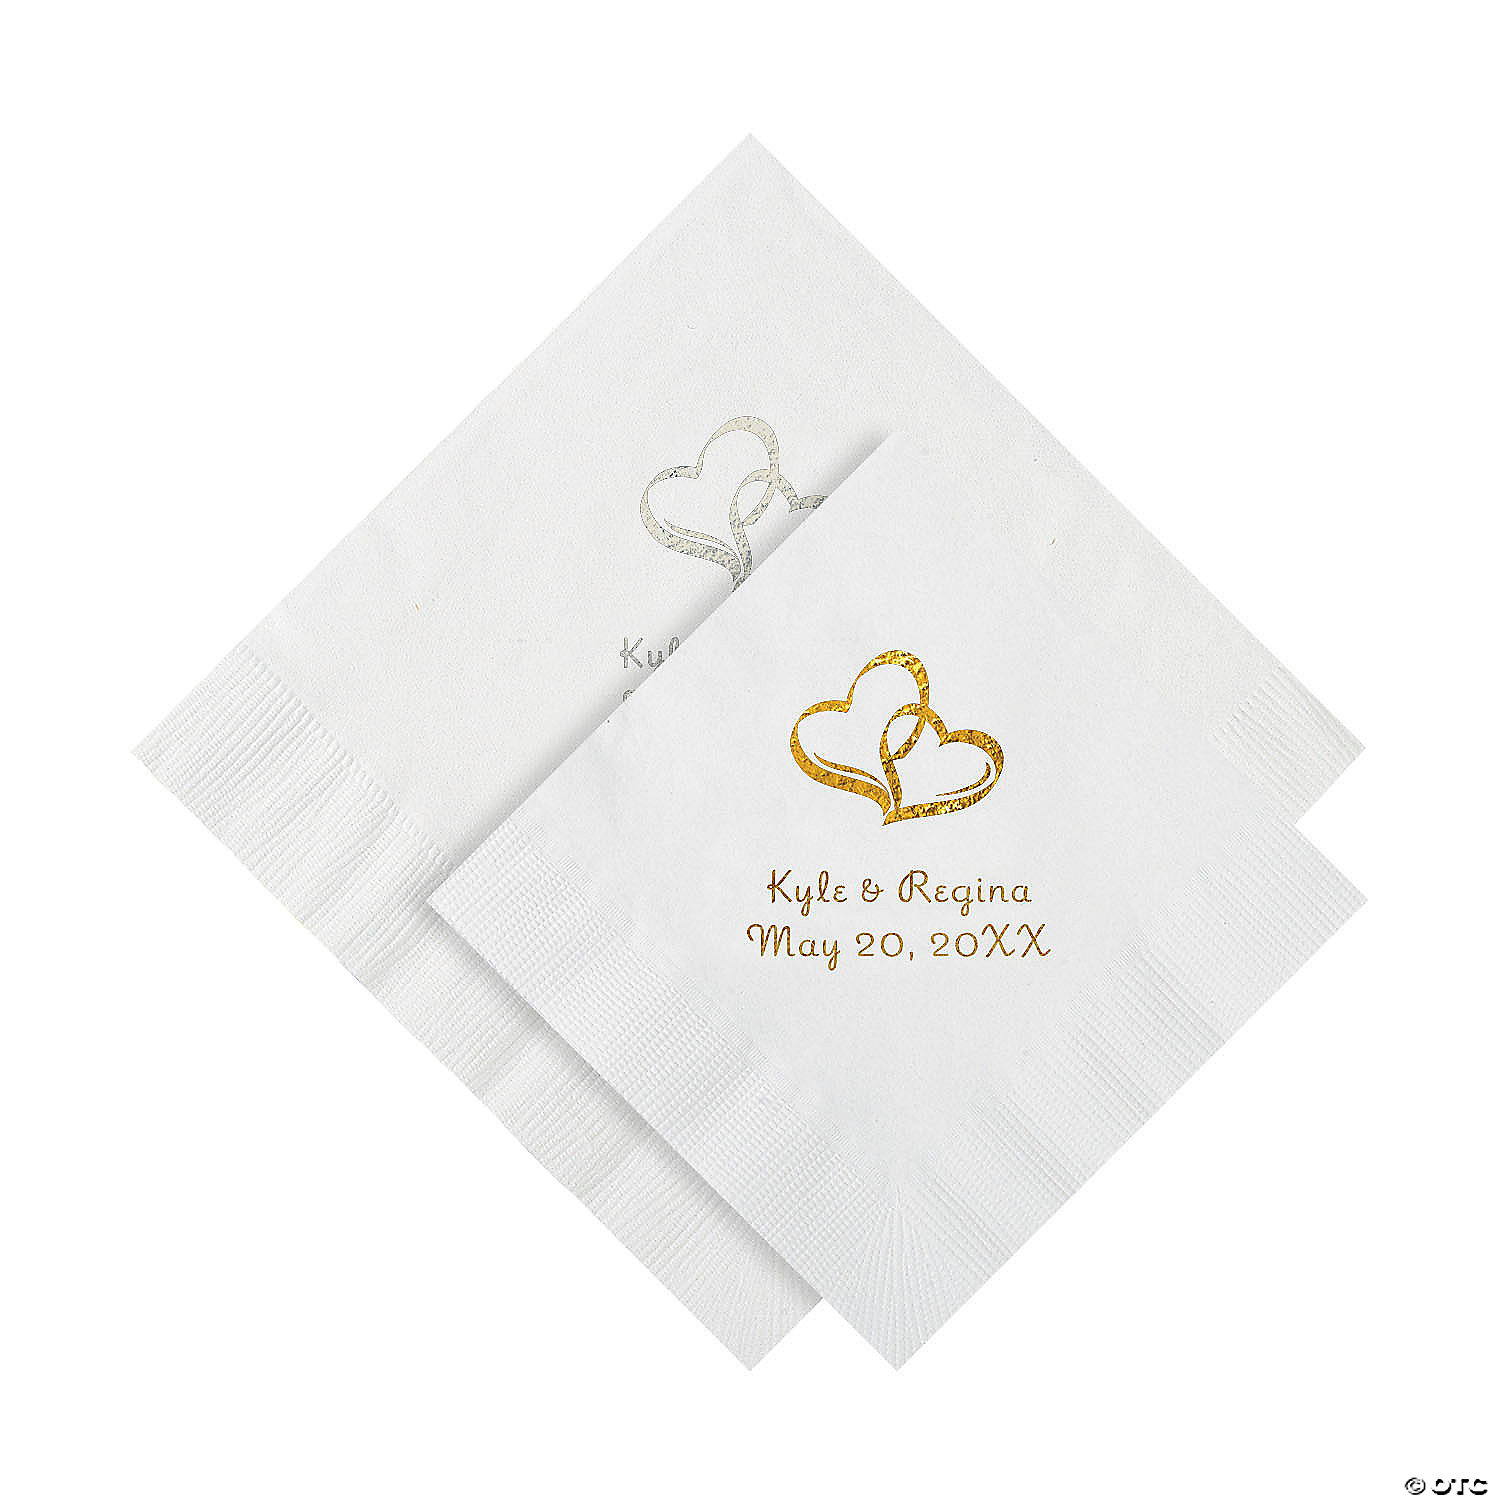 Wedding Napkins Napkin Rings Set Of 4 Holiday Napkin Rings in Gold Leaf With Embossed Features Handmade Napkin Rings for Cocktail Napkins